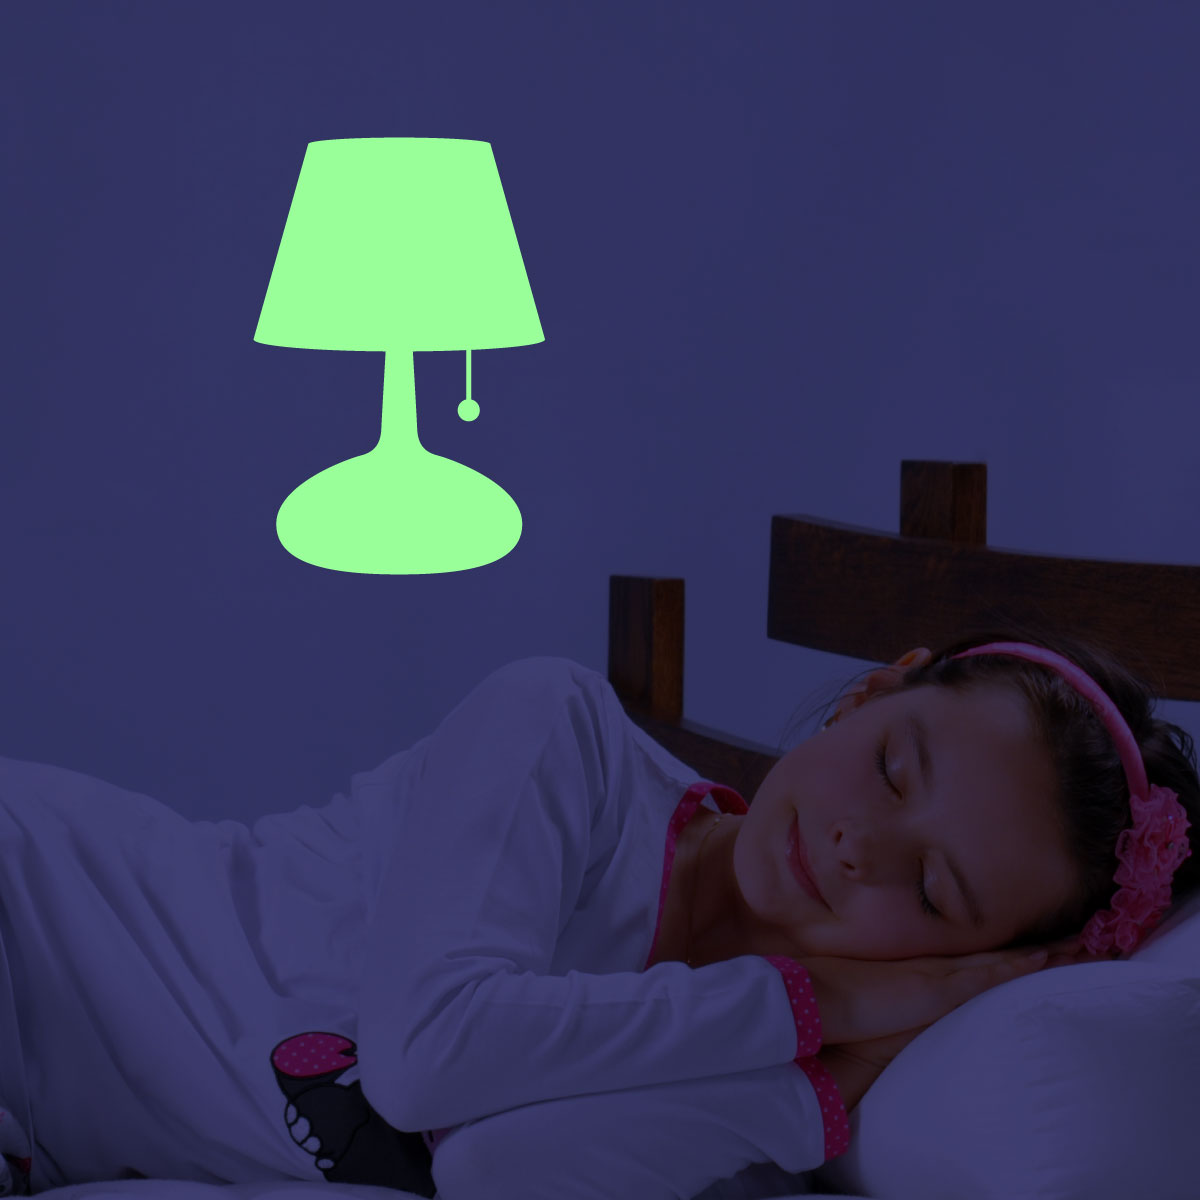 Wall decal Glow in the dark Design bedside lamp